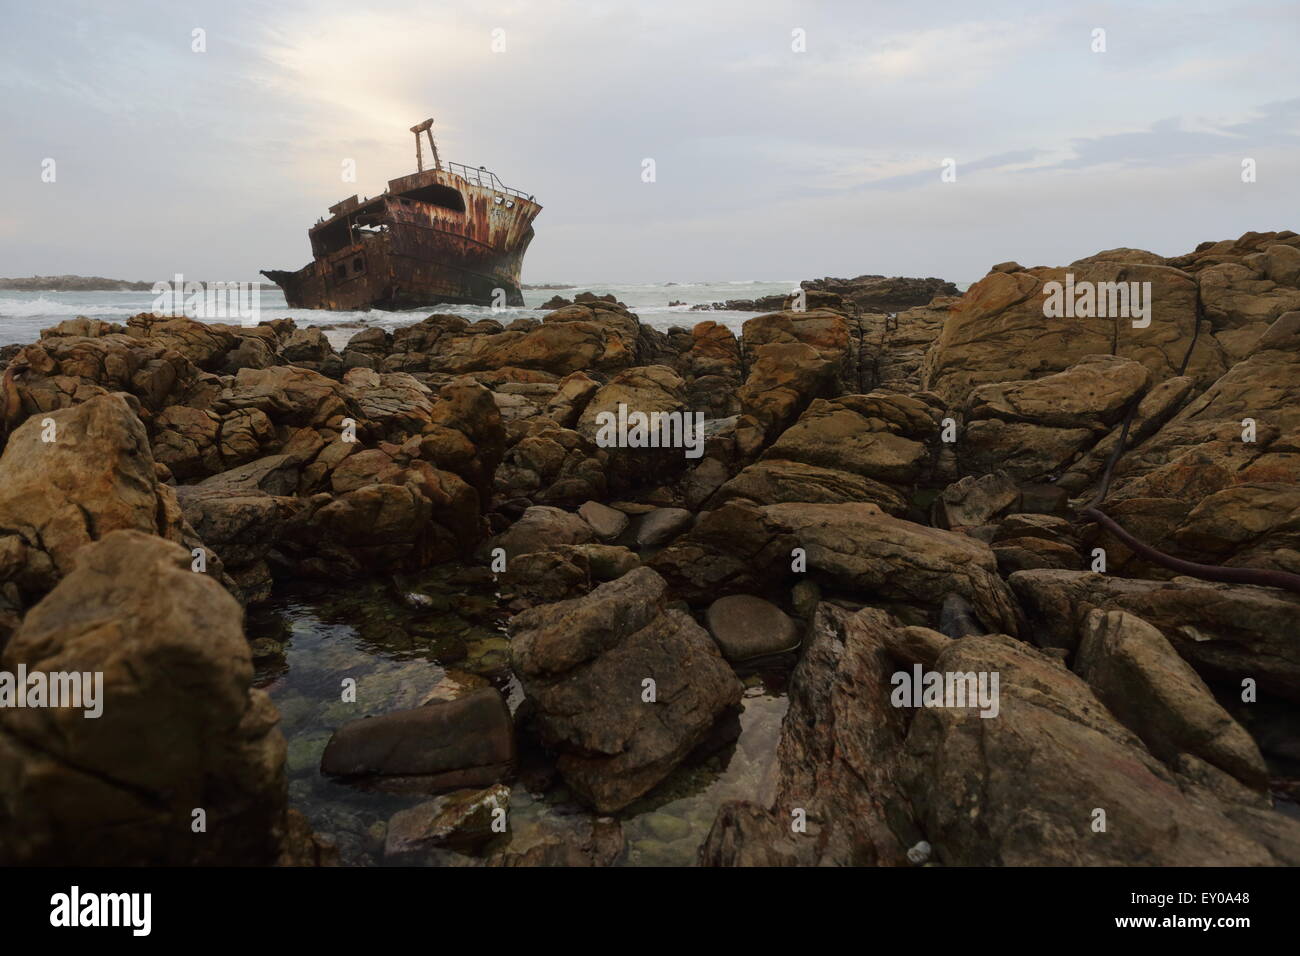 Shipwreck  of the Meisho Maru (a Japanese fishing vessel) off the South African coast close to Cape Agulhas, viewed at sunrise Stock Photo